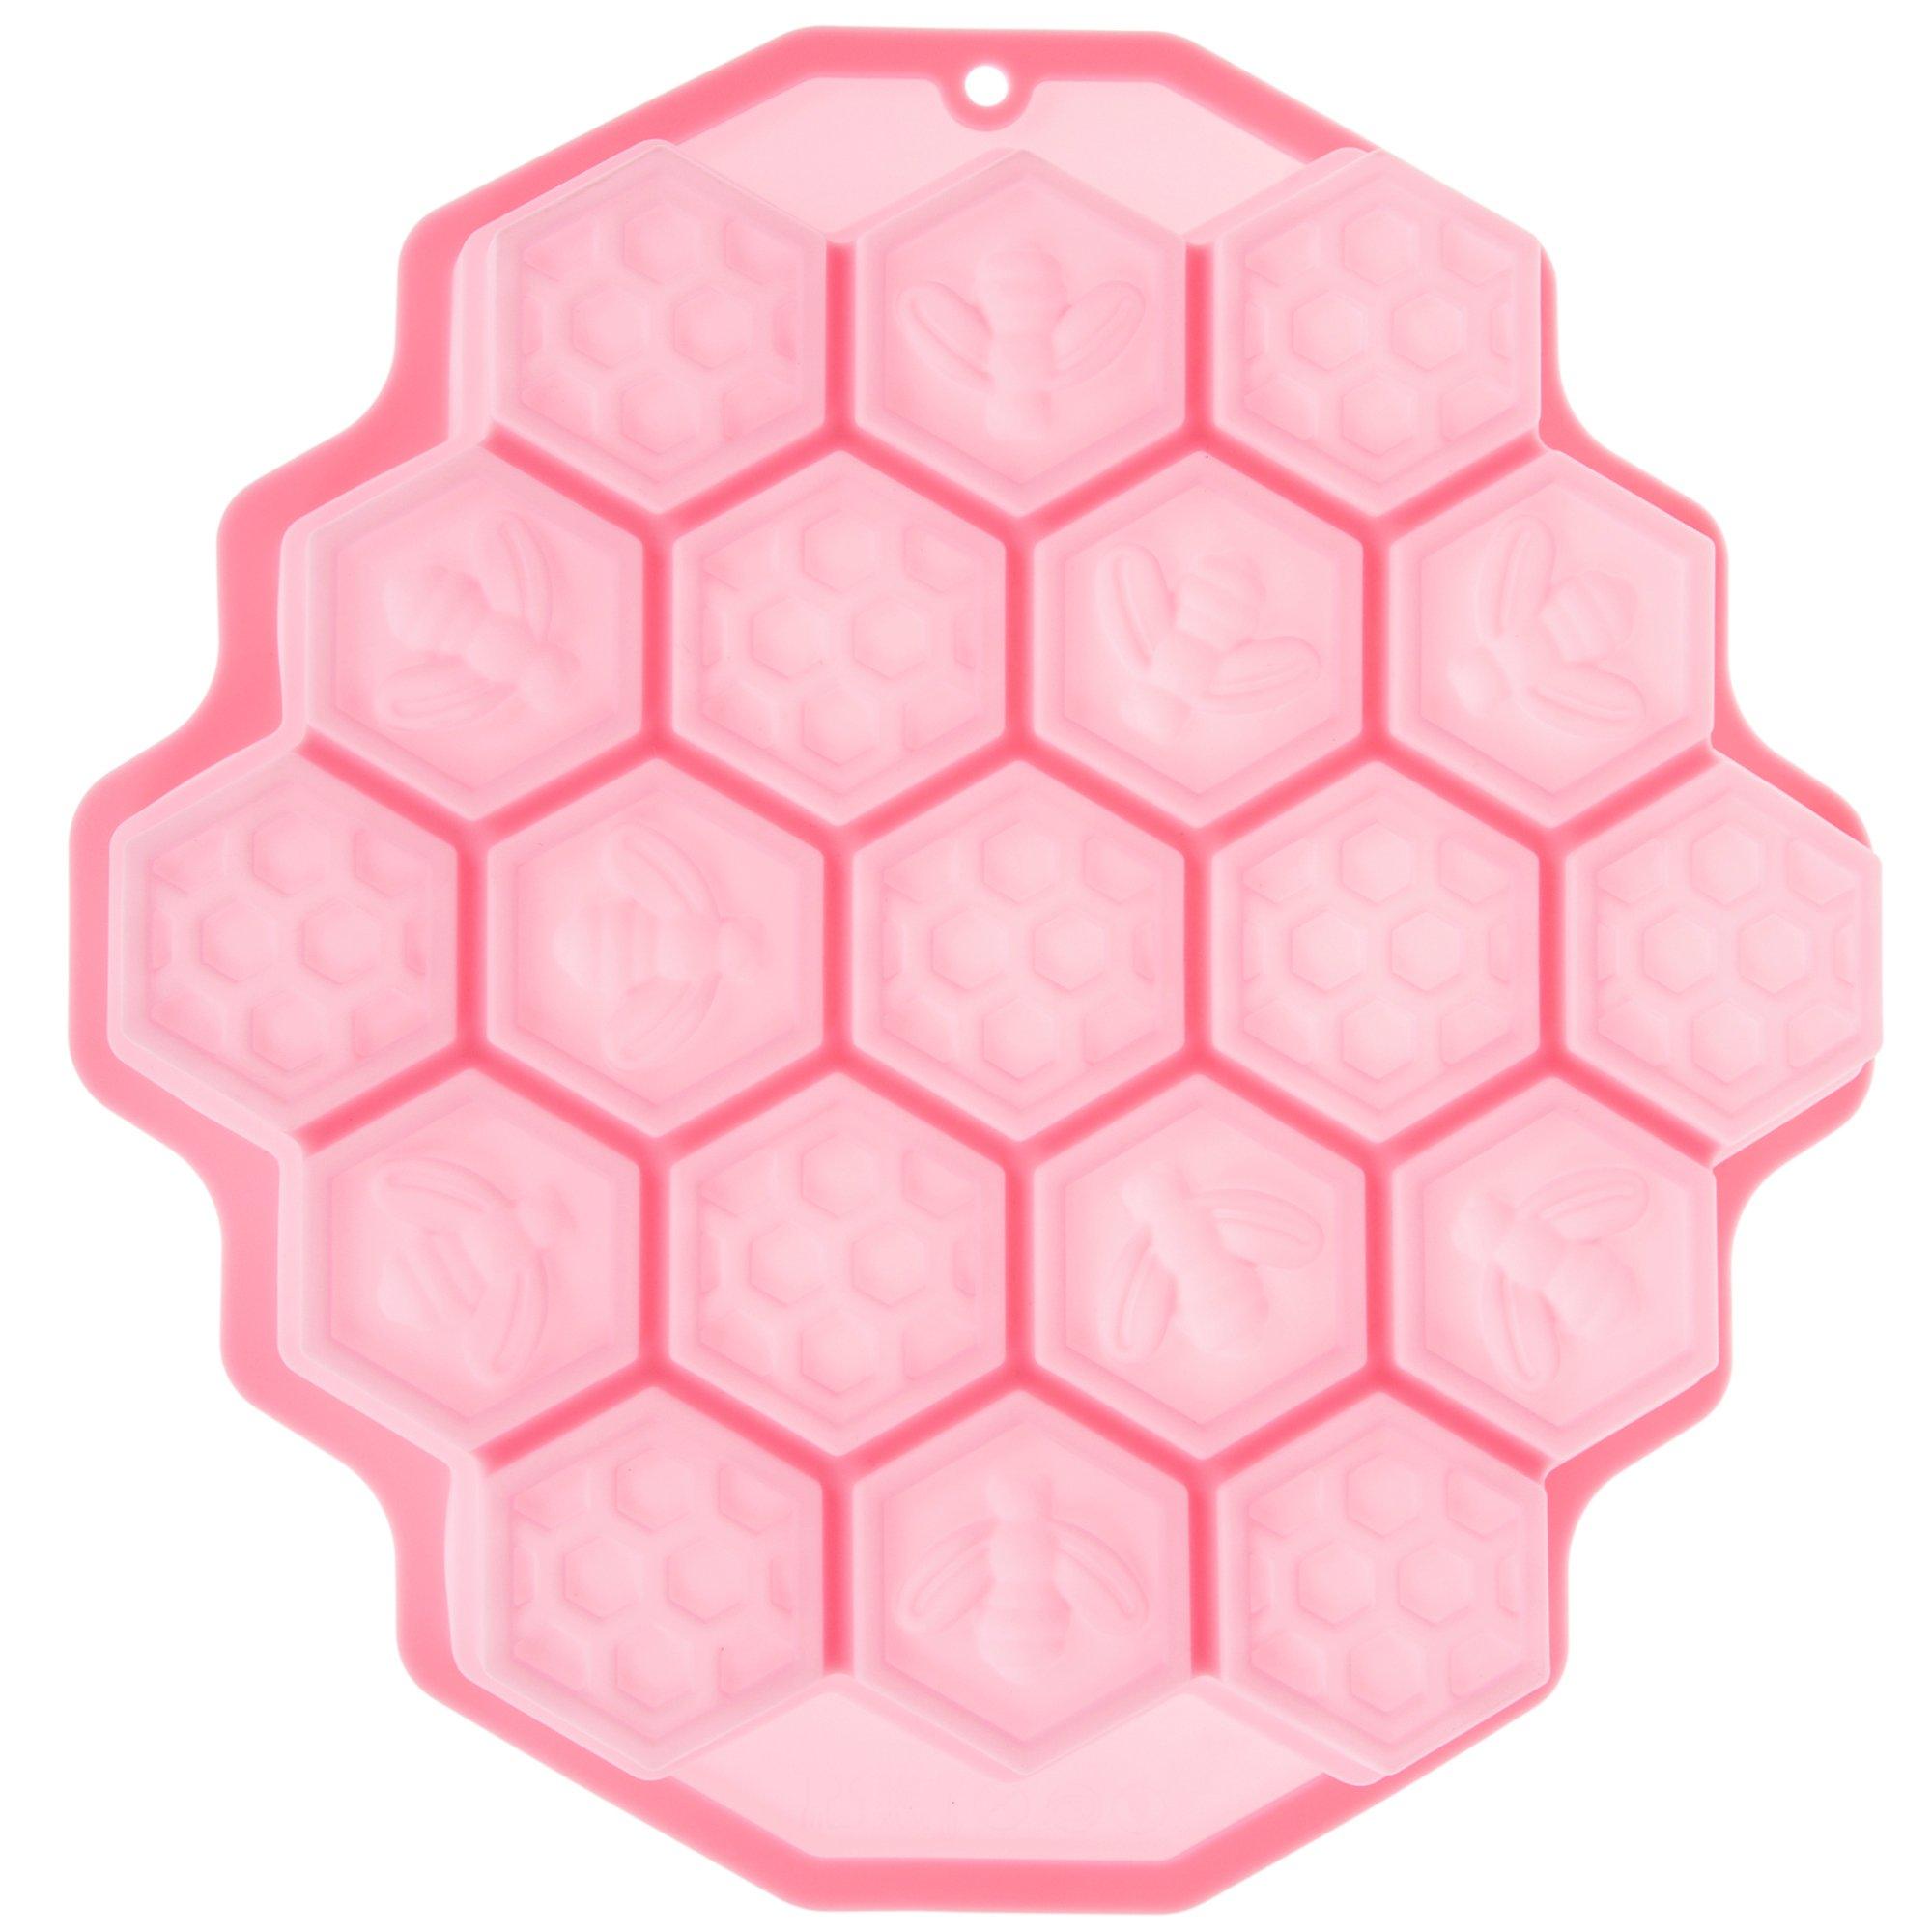 Honeycomb Silicone Mold For Birthdays Or Everyday Big Cakes